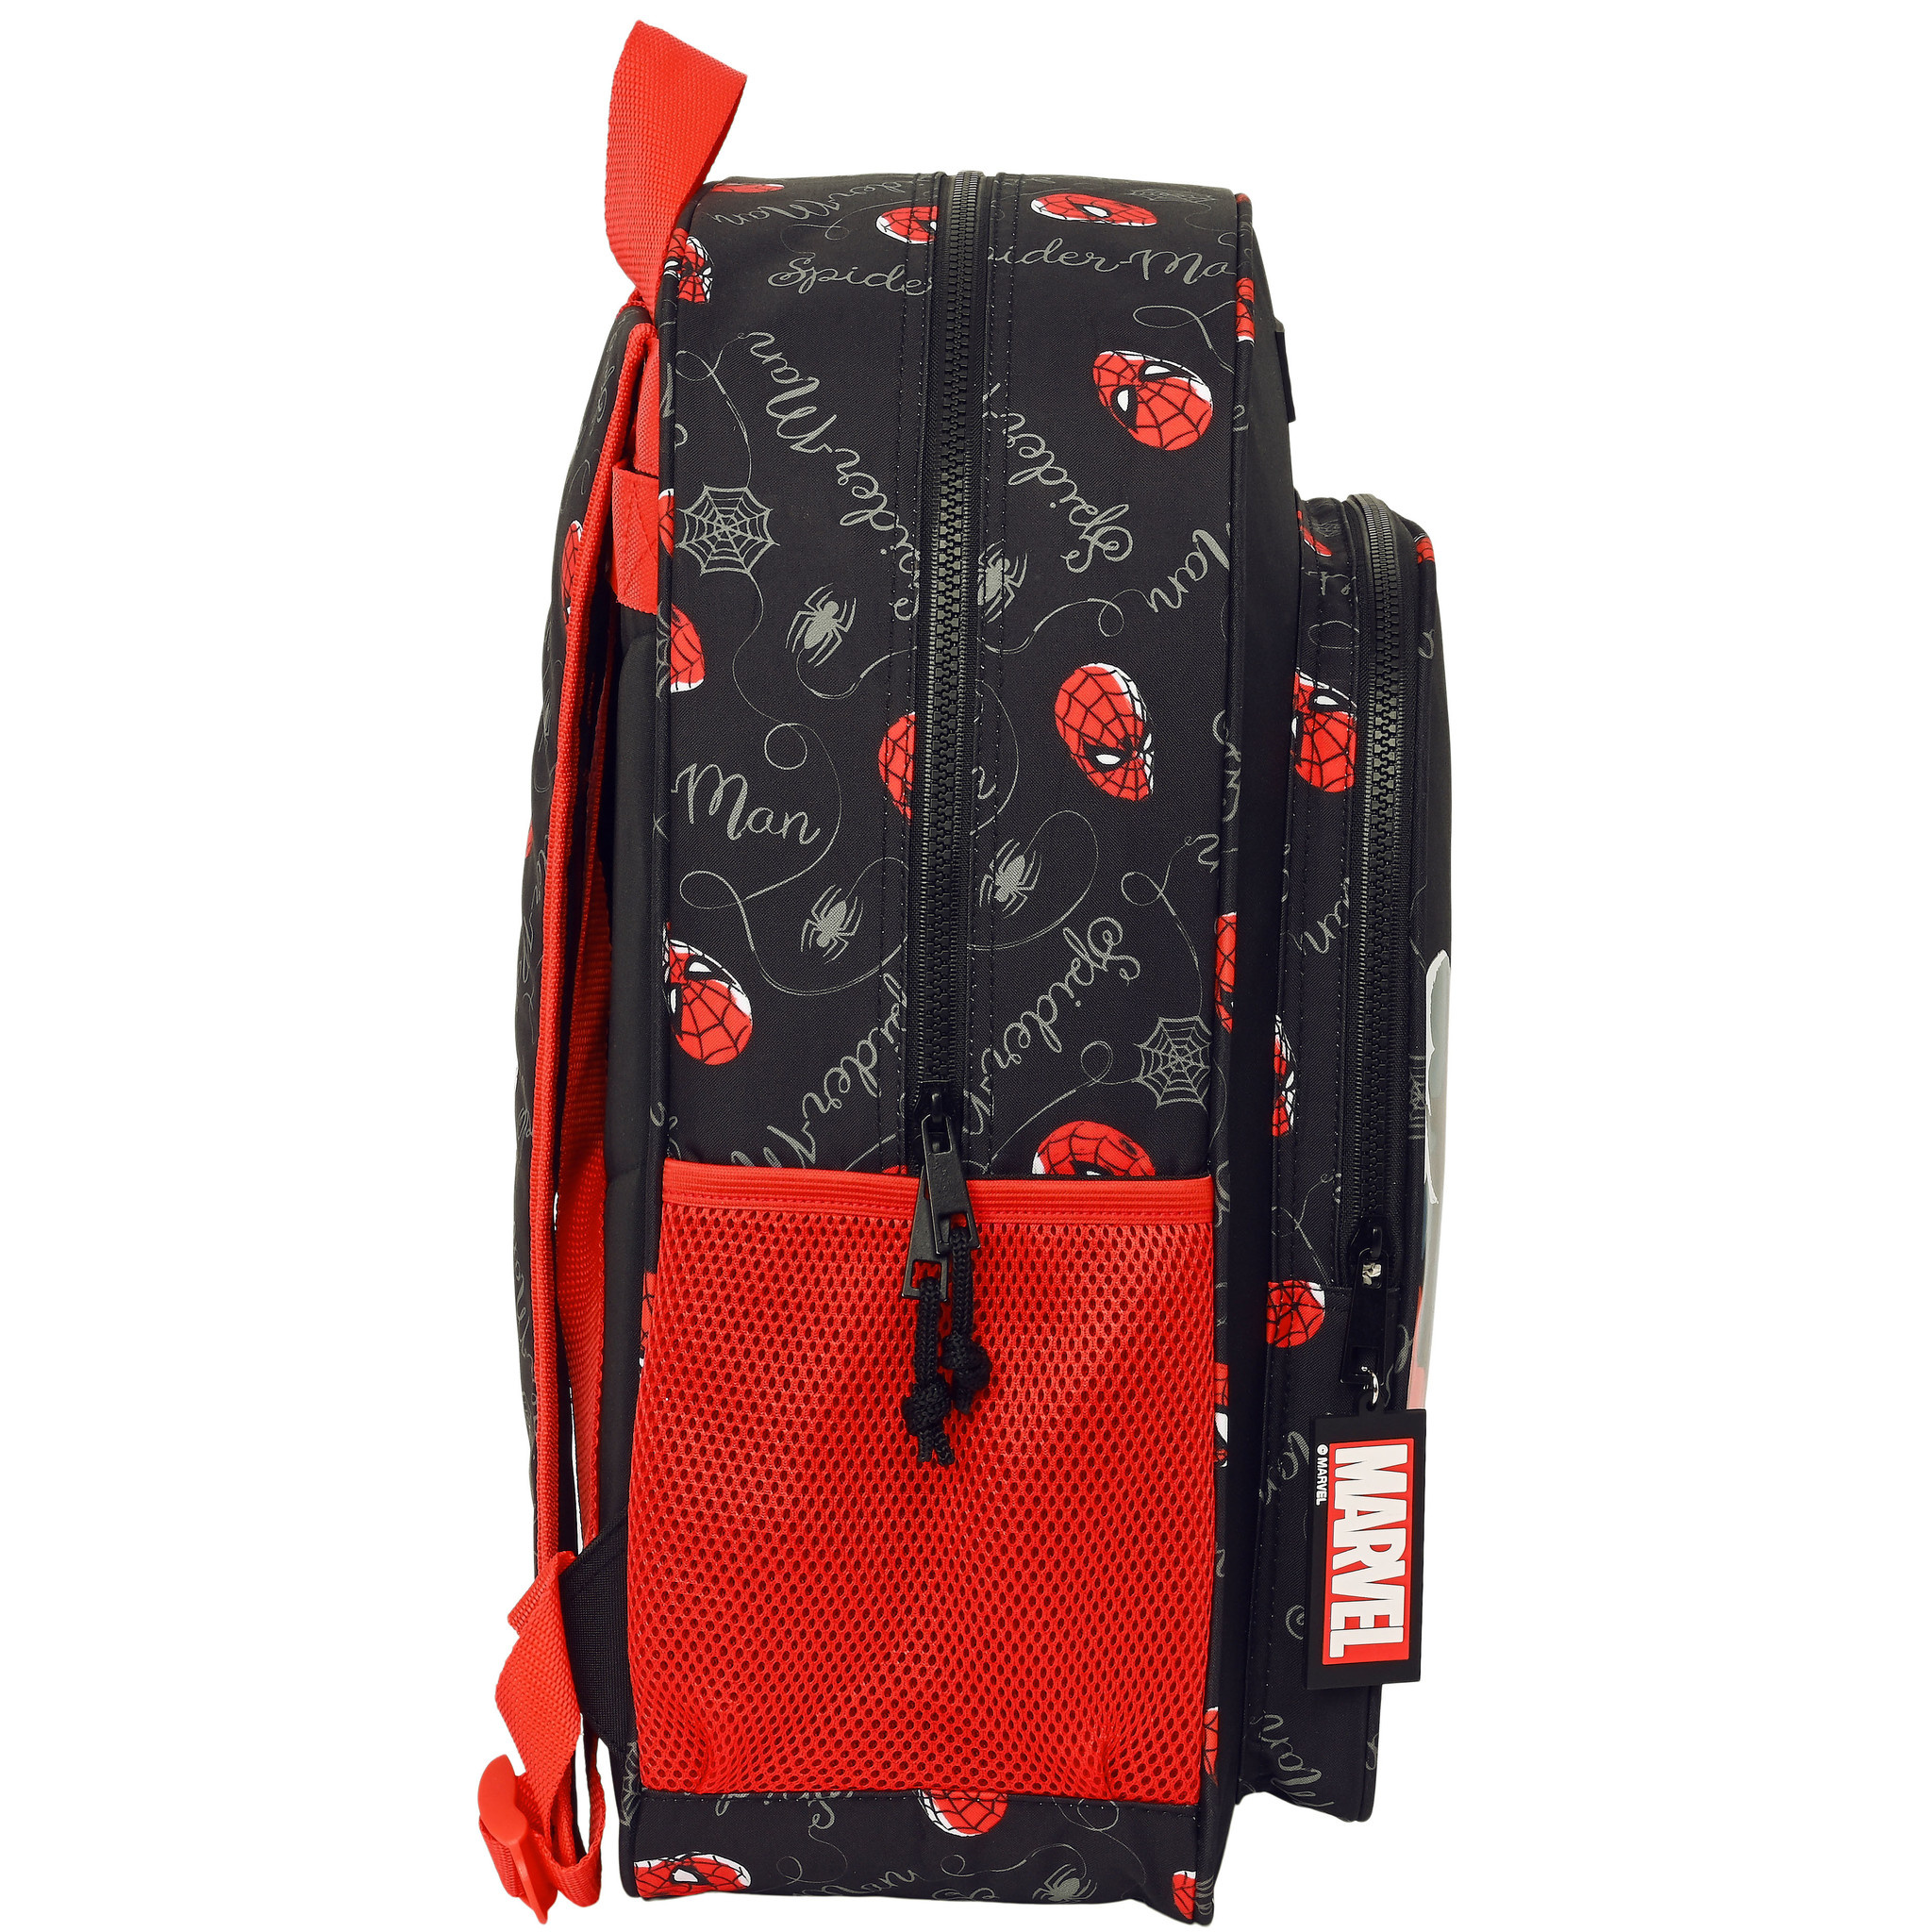 Spiderman Backpack Hero - 42 x 33 x 14 cm - Polyester